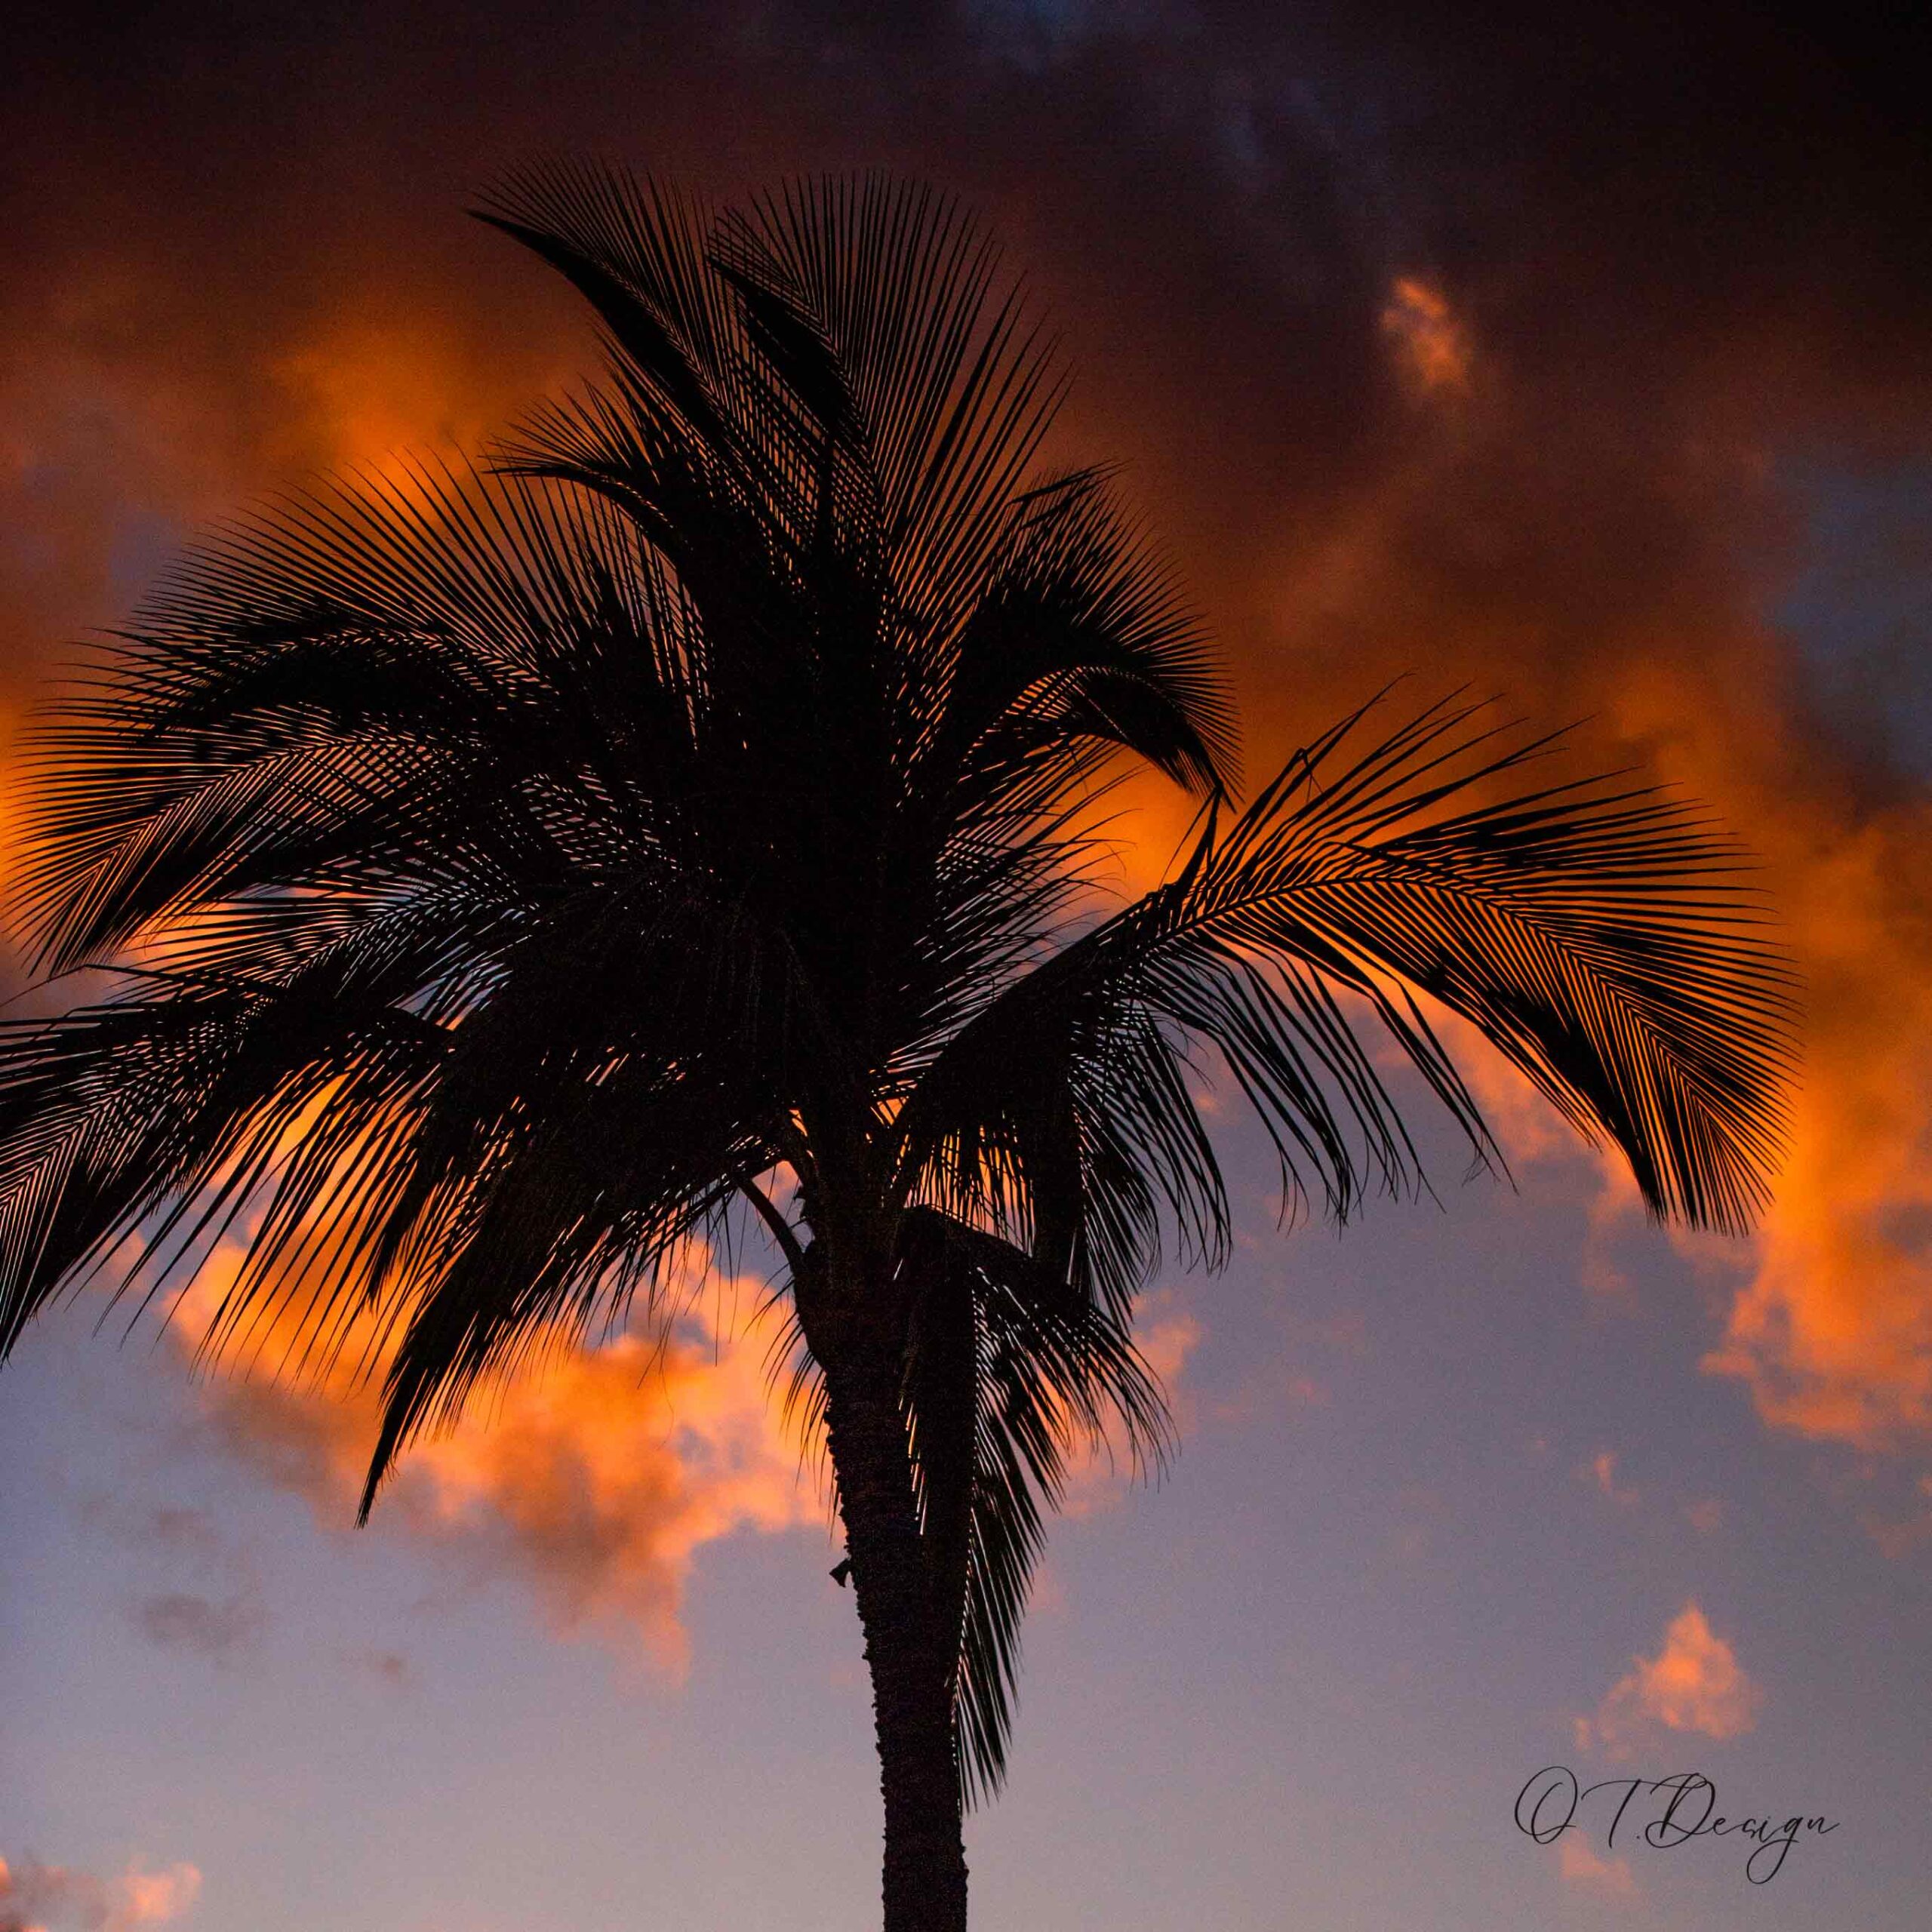 Palm trees dancing in the skies at sunset in Maui, Hawaii